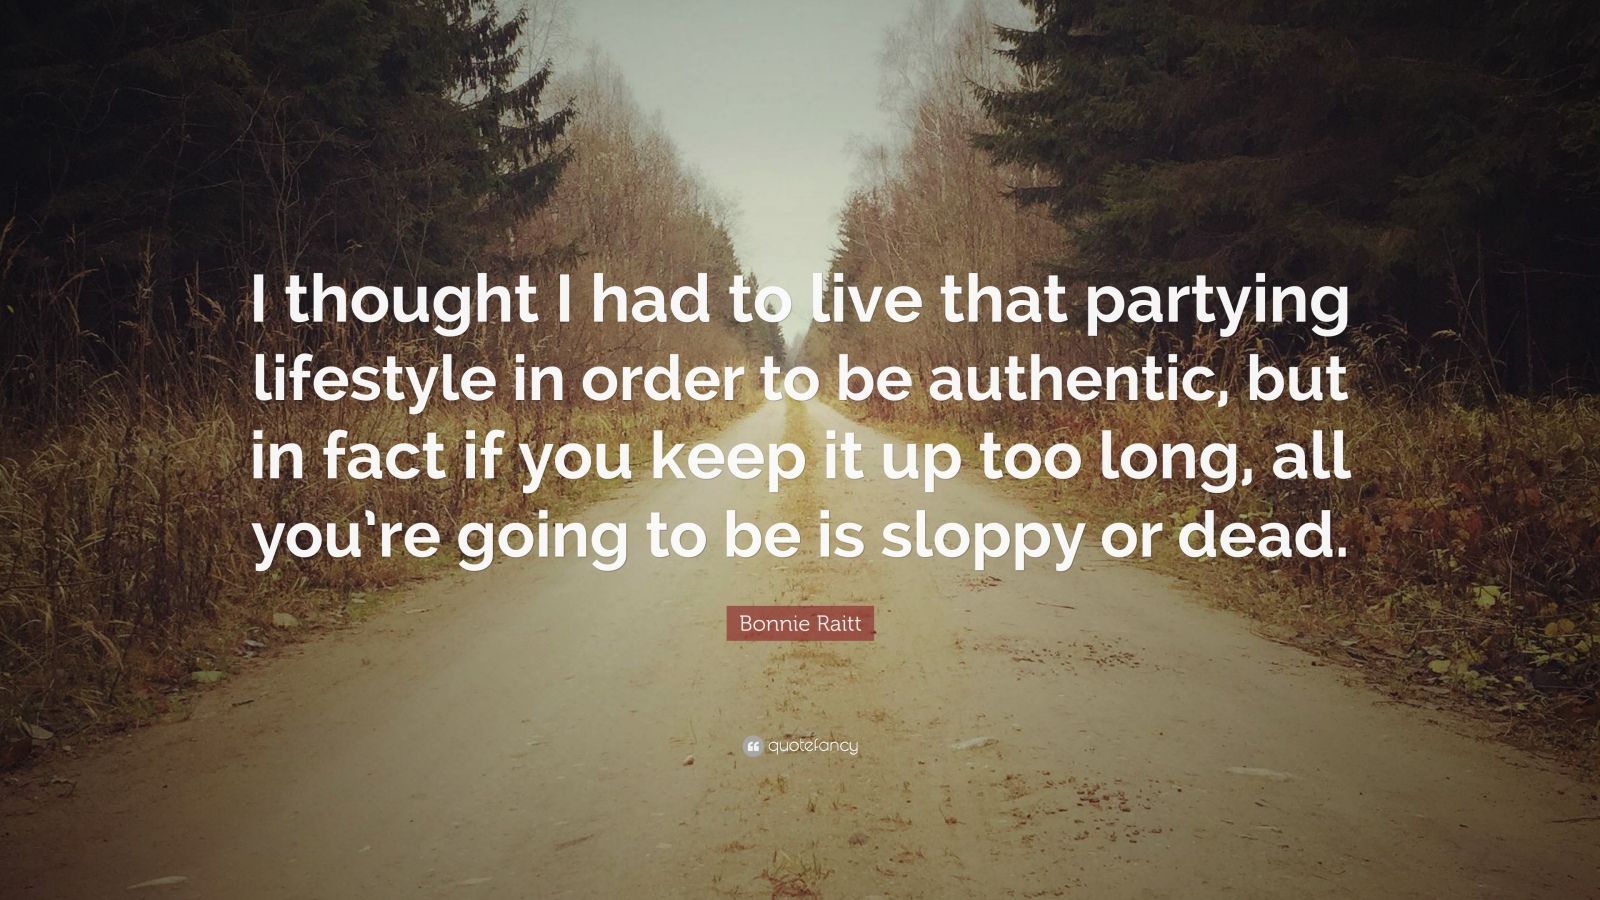 Bonnie Raitt Quote: “I thought I had to live that partying lifestyle in ...